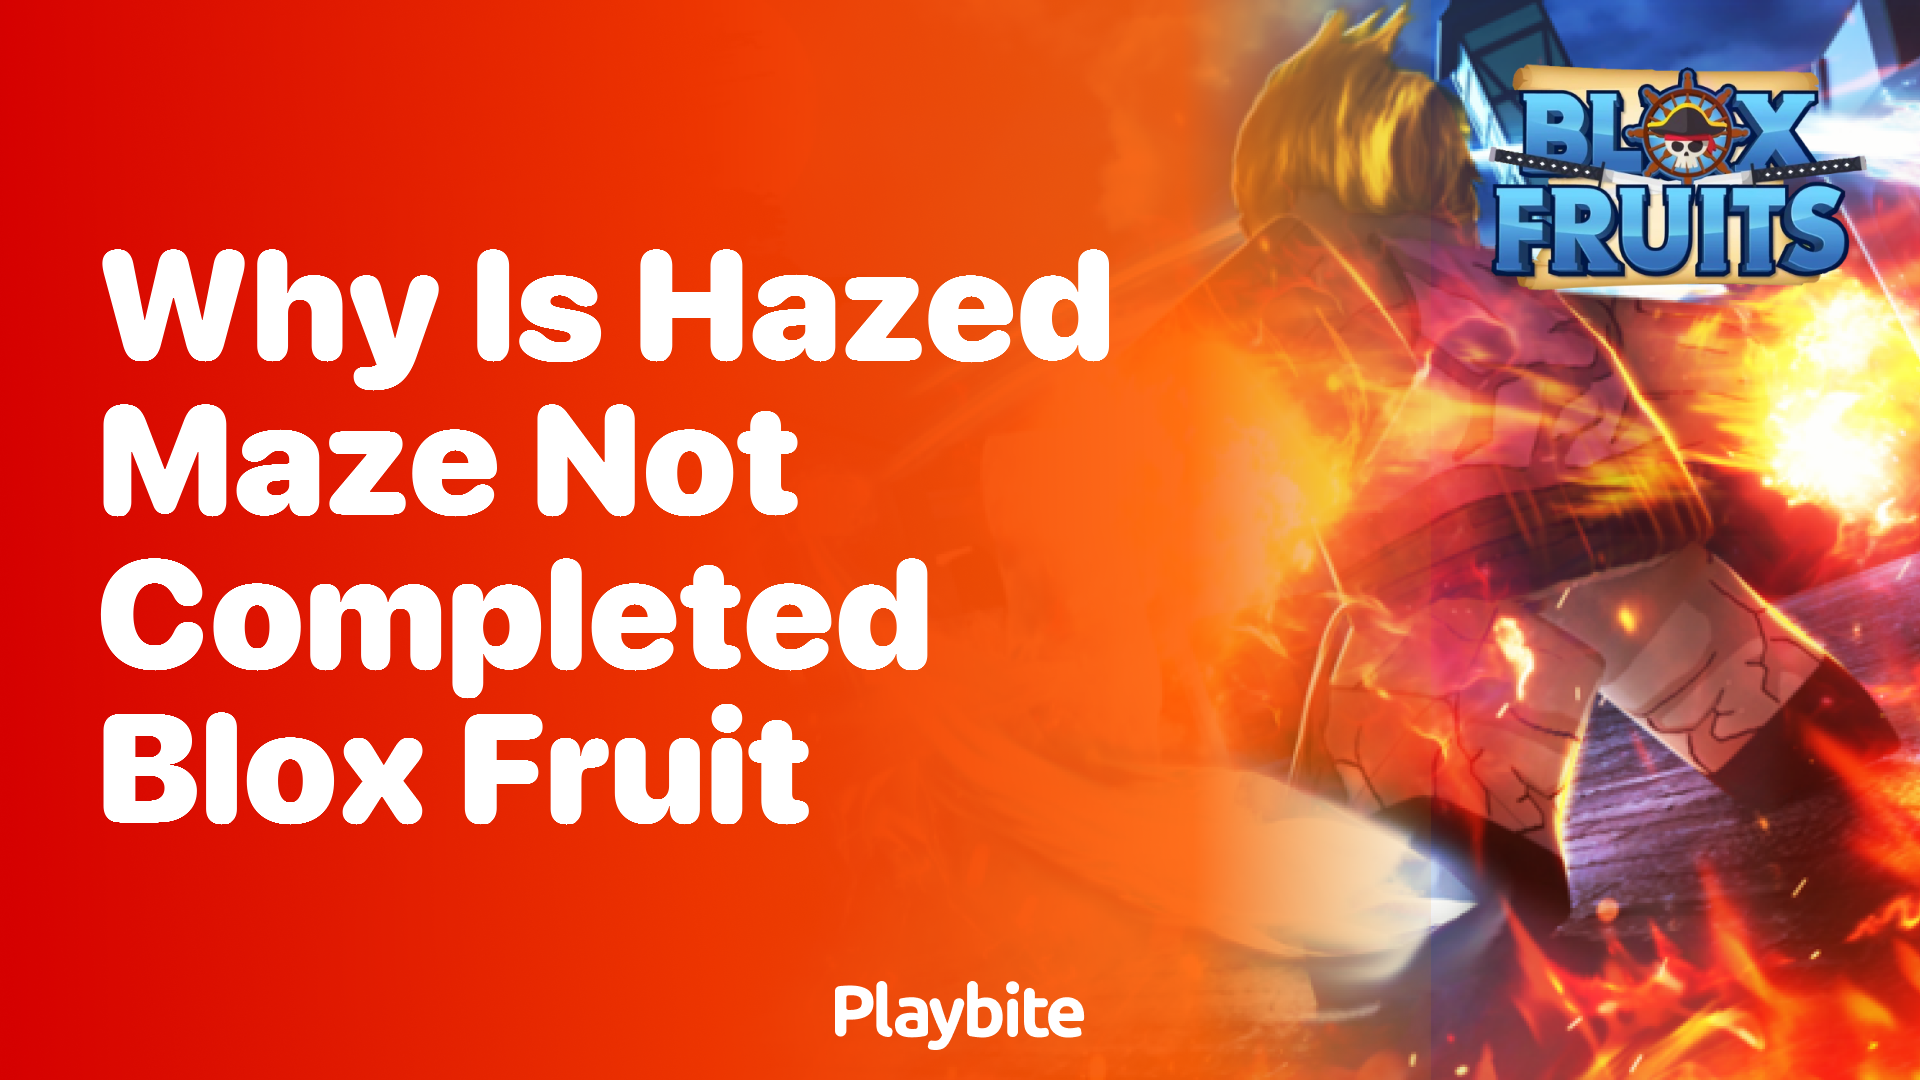 Why Is Hazed Maze Not Completed in Blox Fruit?